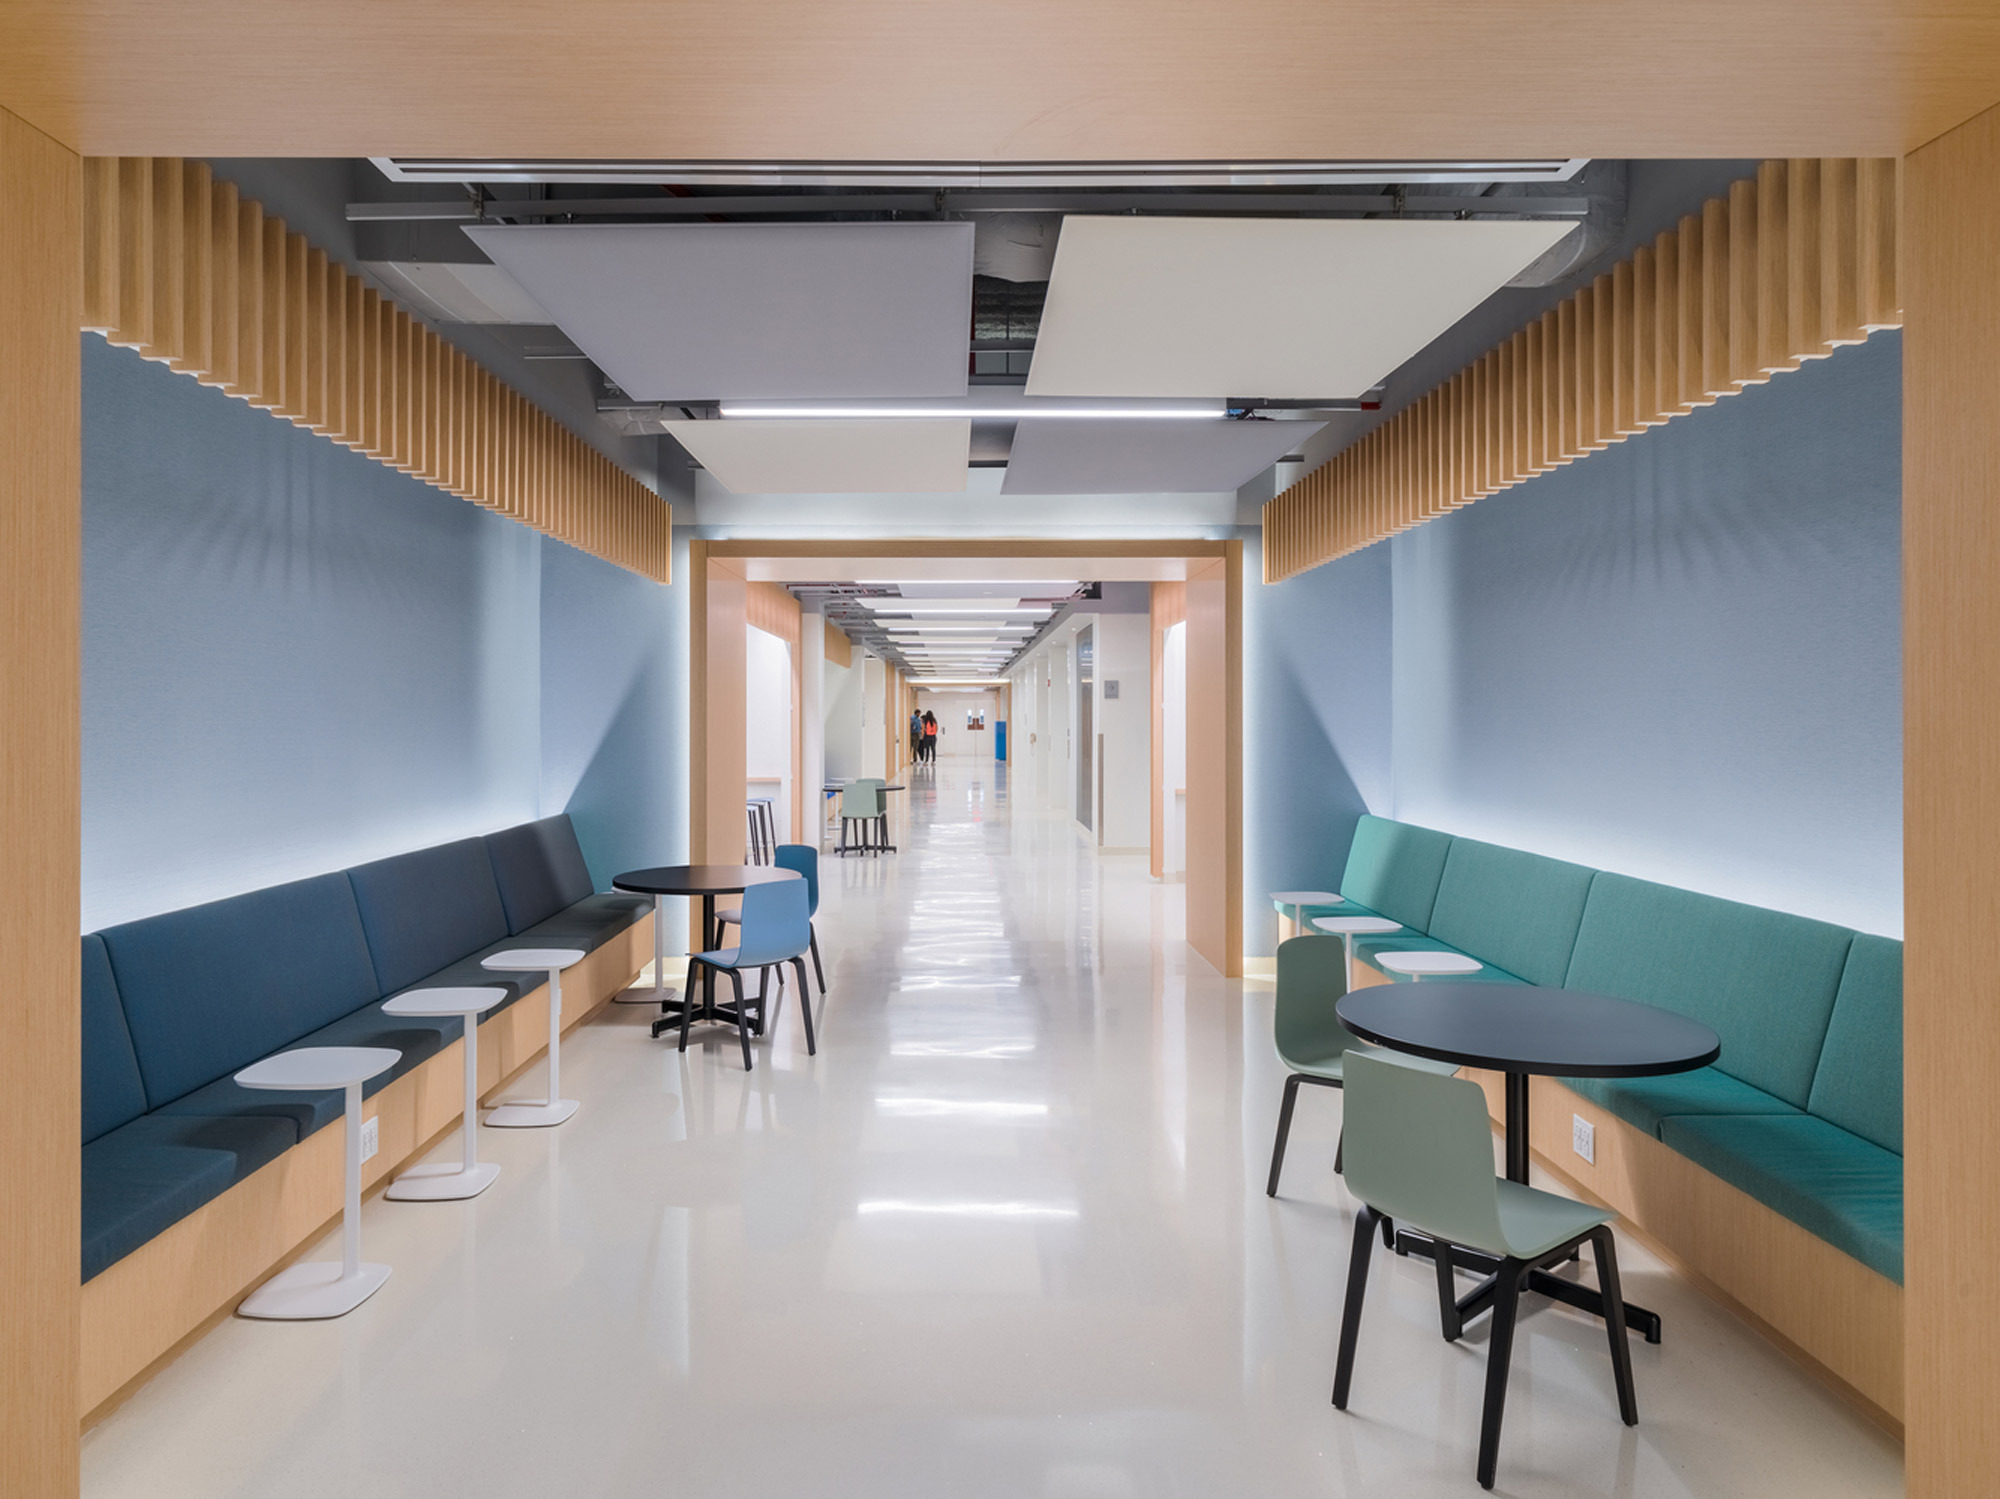 Modern corridor featuring sleek, high-gloss flooring that reflects the clean lines of recessed lighting. Neutral walls are accented by warm wooden slats, creating a tranquil environment. Strategically placed seating with teal and navy cushions provides comfort, complemented by minimalist round tables.